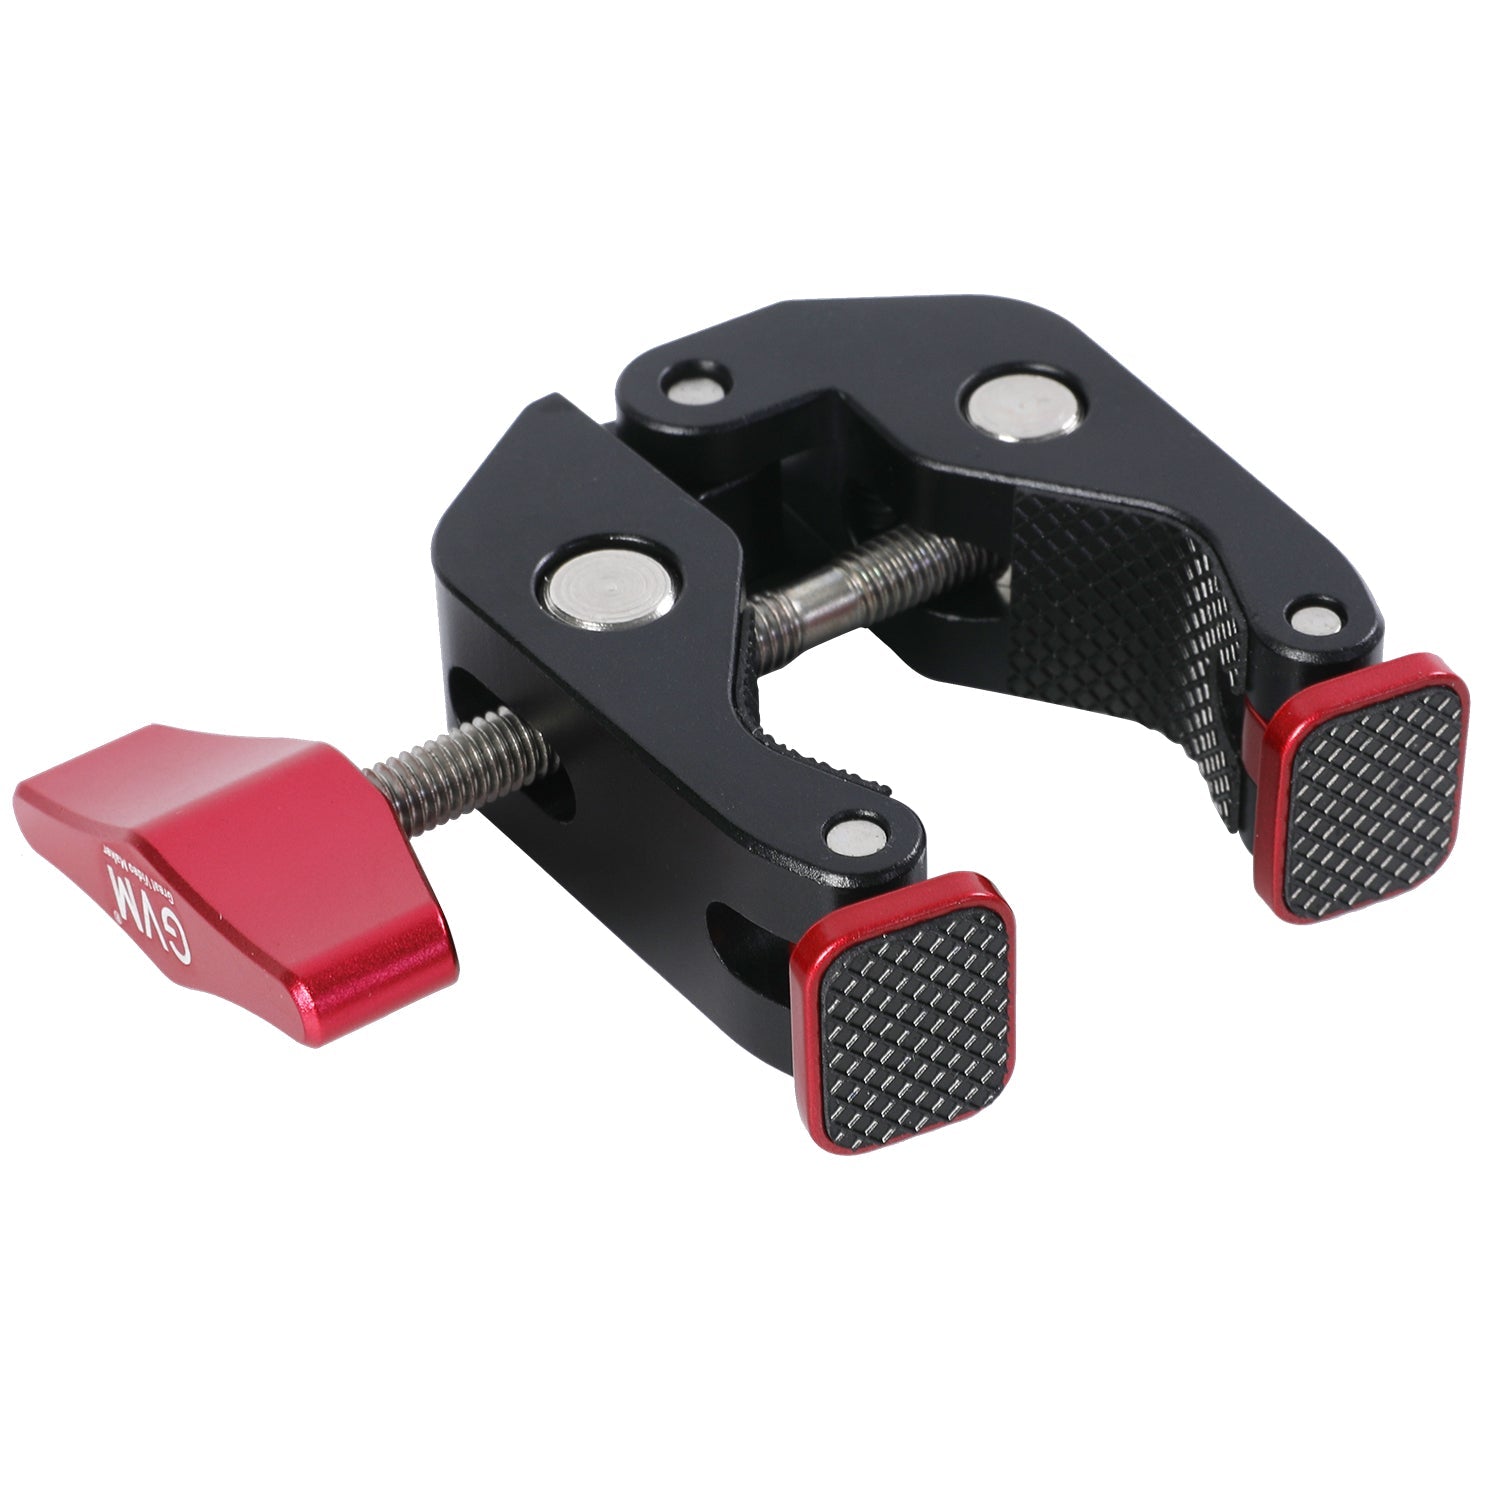 GVM Super Crab Clamp, Magic Arm Gripper Clamp with 1/4 and 3/8 Thread Clips for DSLR Cameras - GVMLED